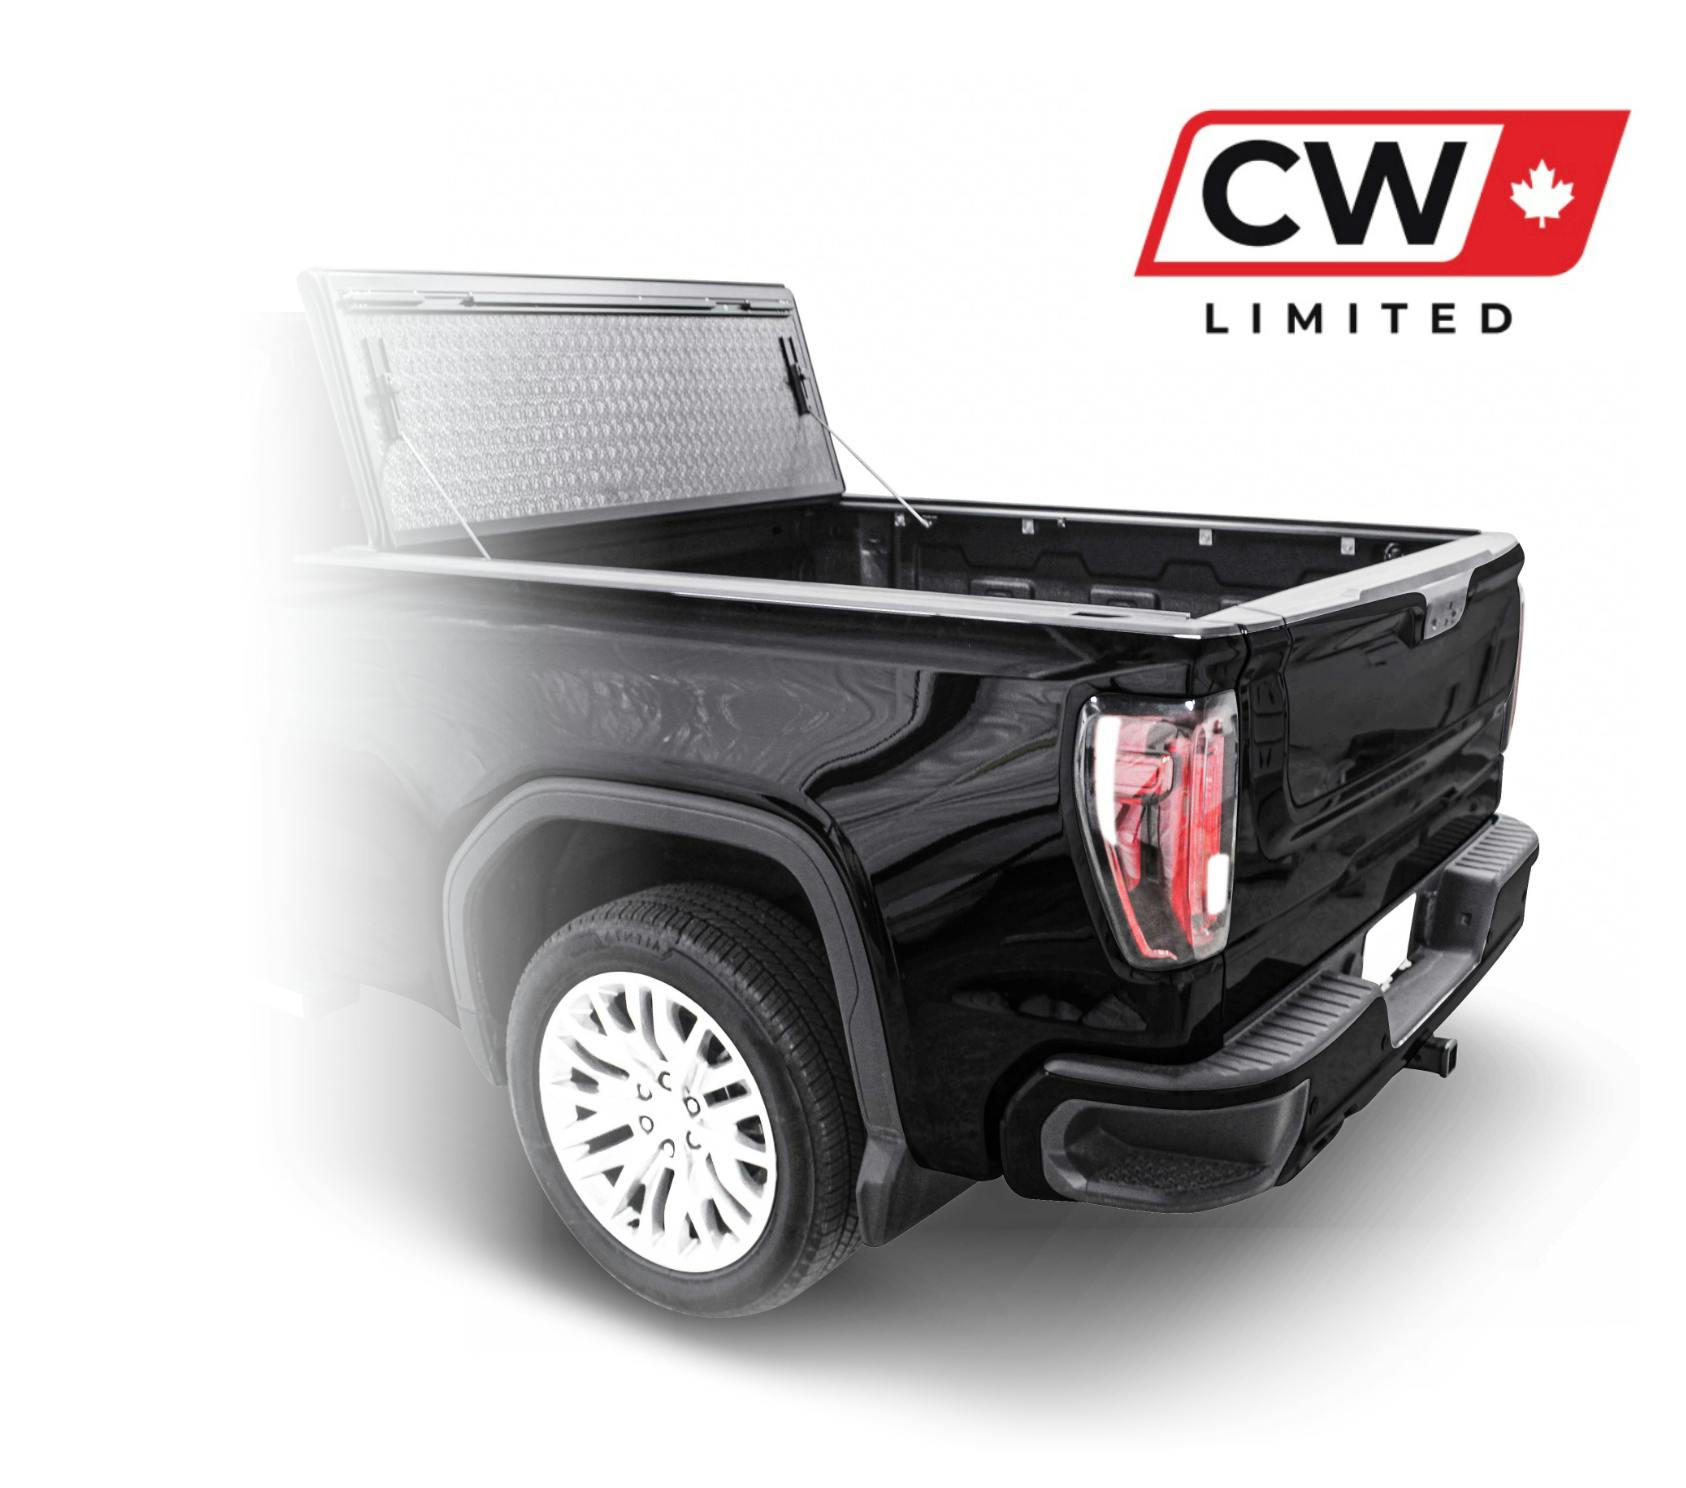 CW Limited project image showing the rear end of a pickup truck and the new CW logo